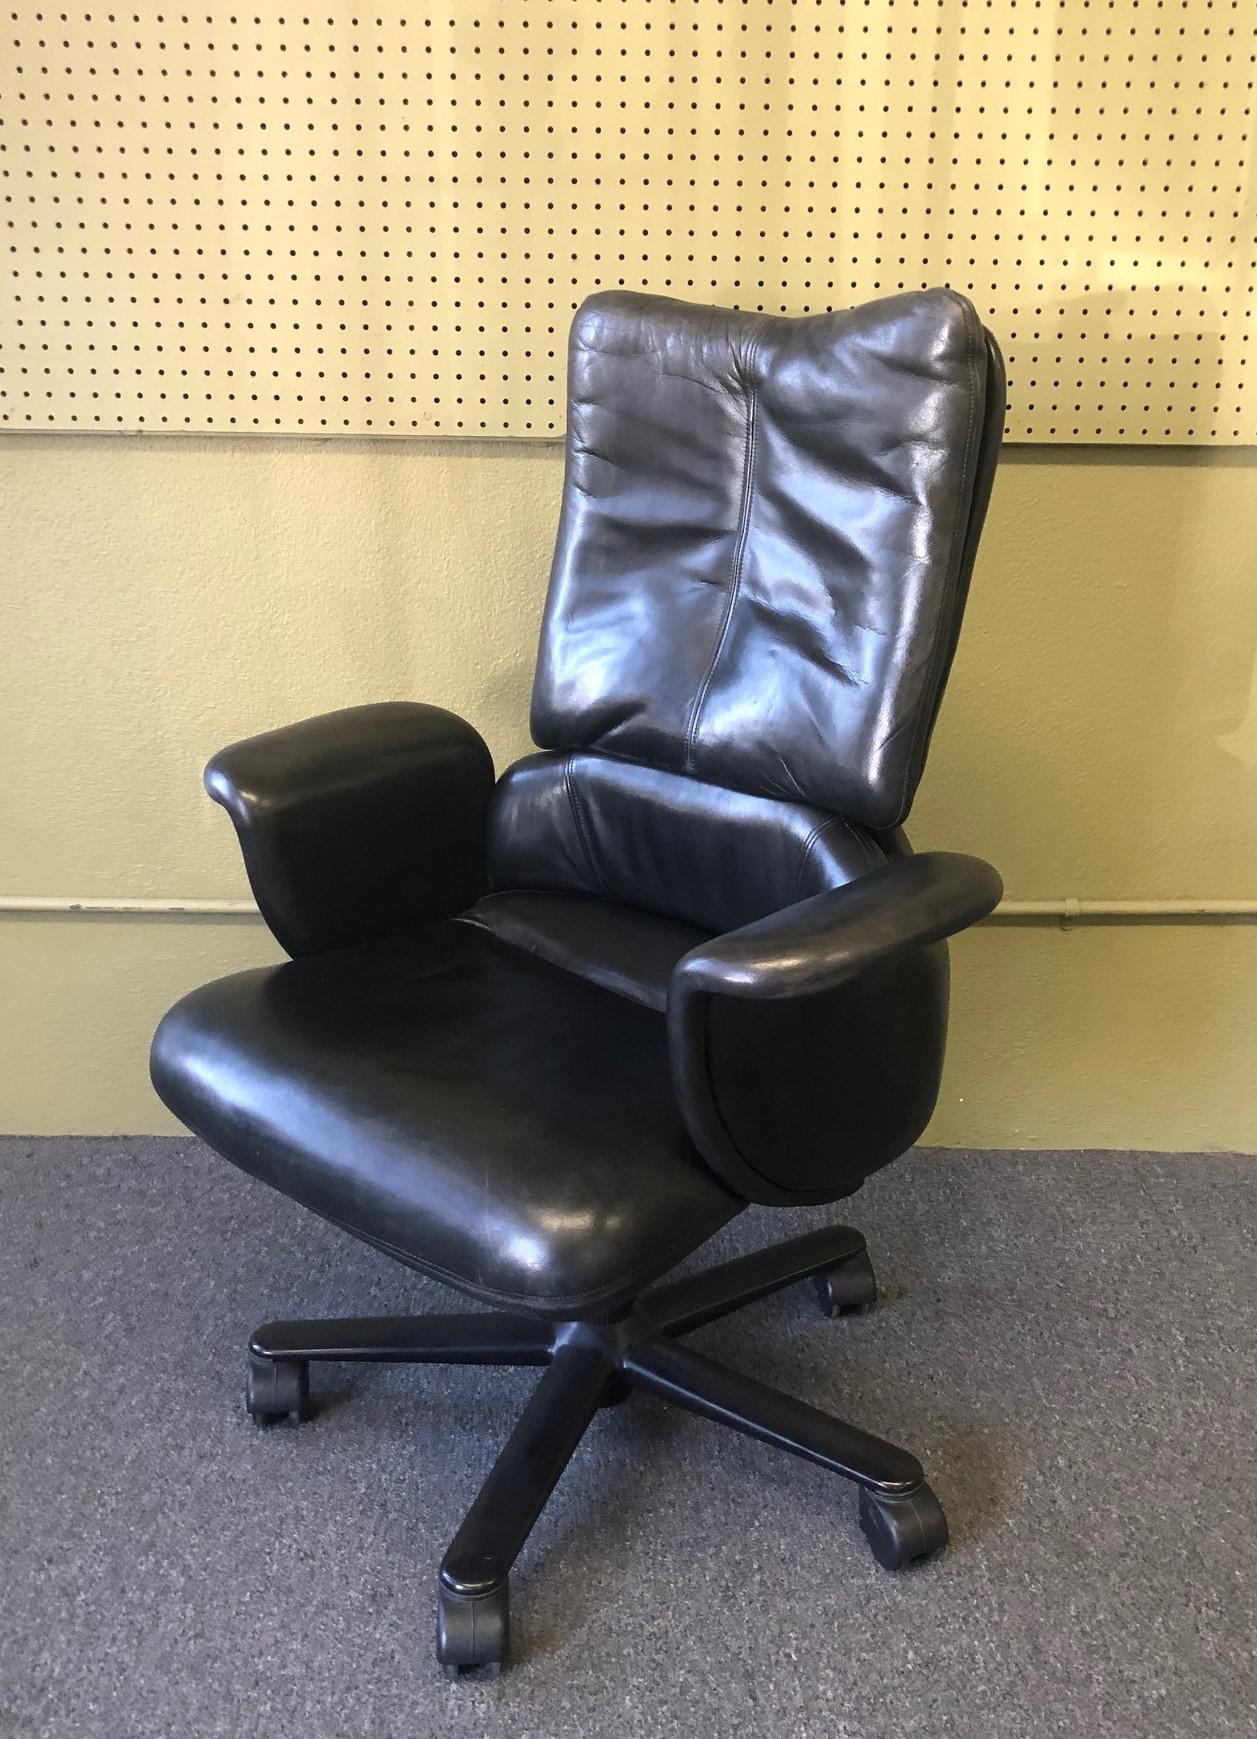 American Executive High Back Leather Office Chair by Geoff Hollington for Herman Miller